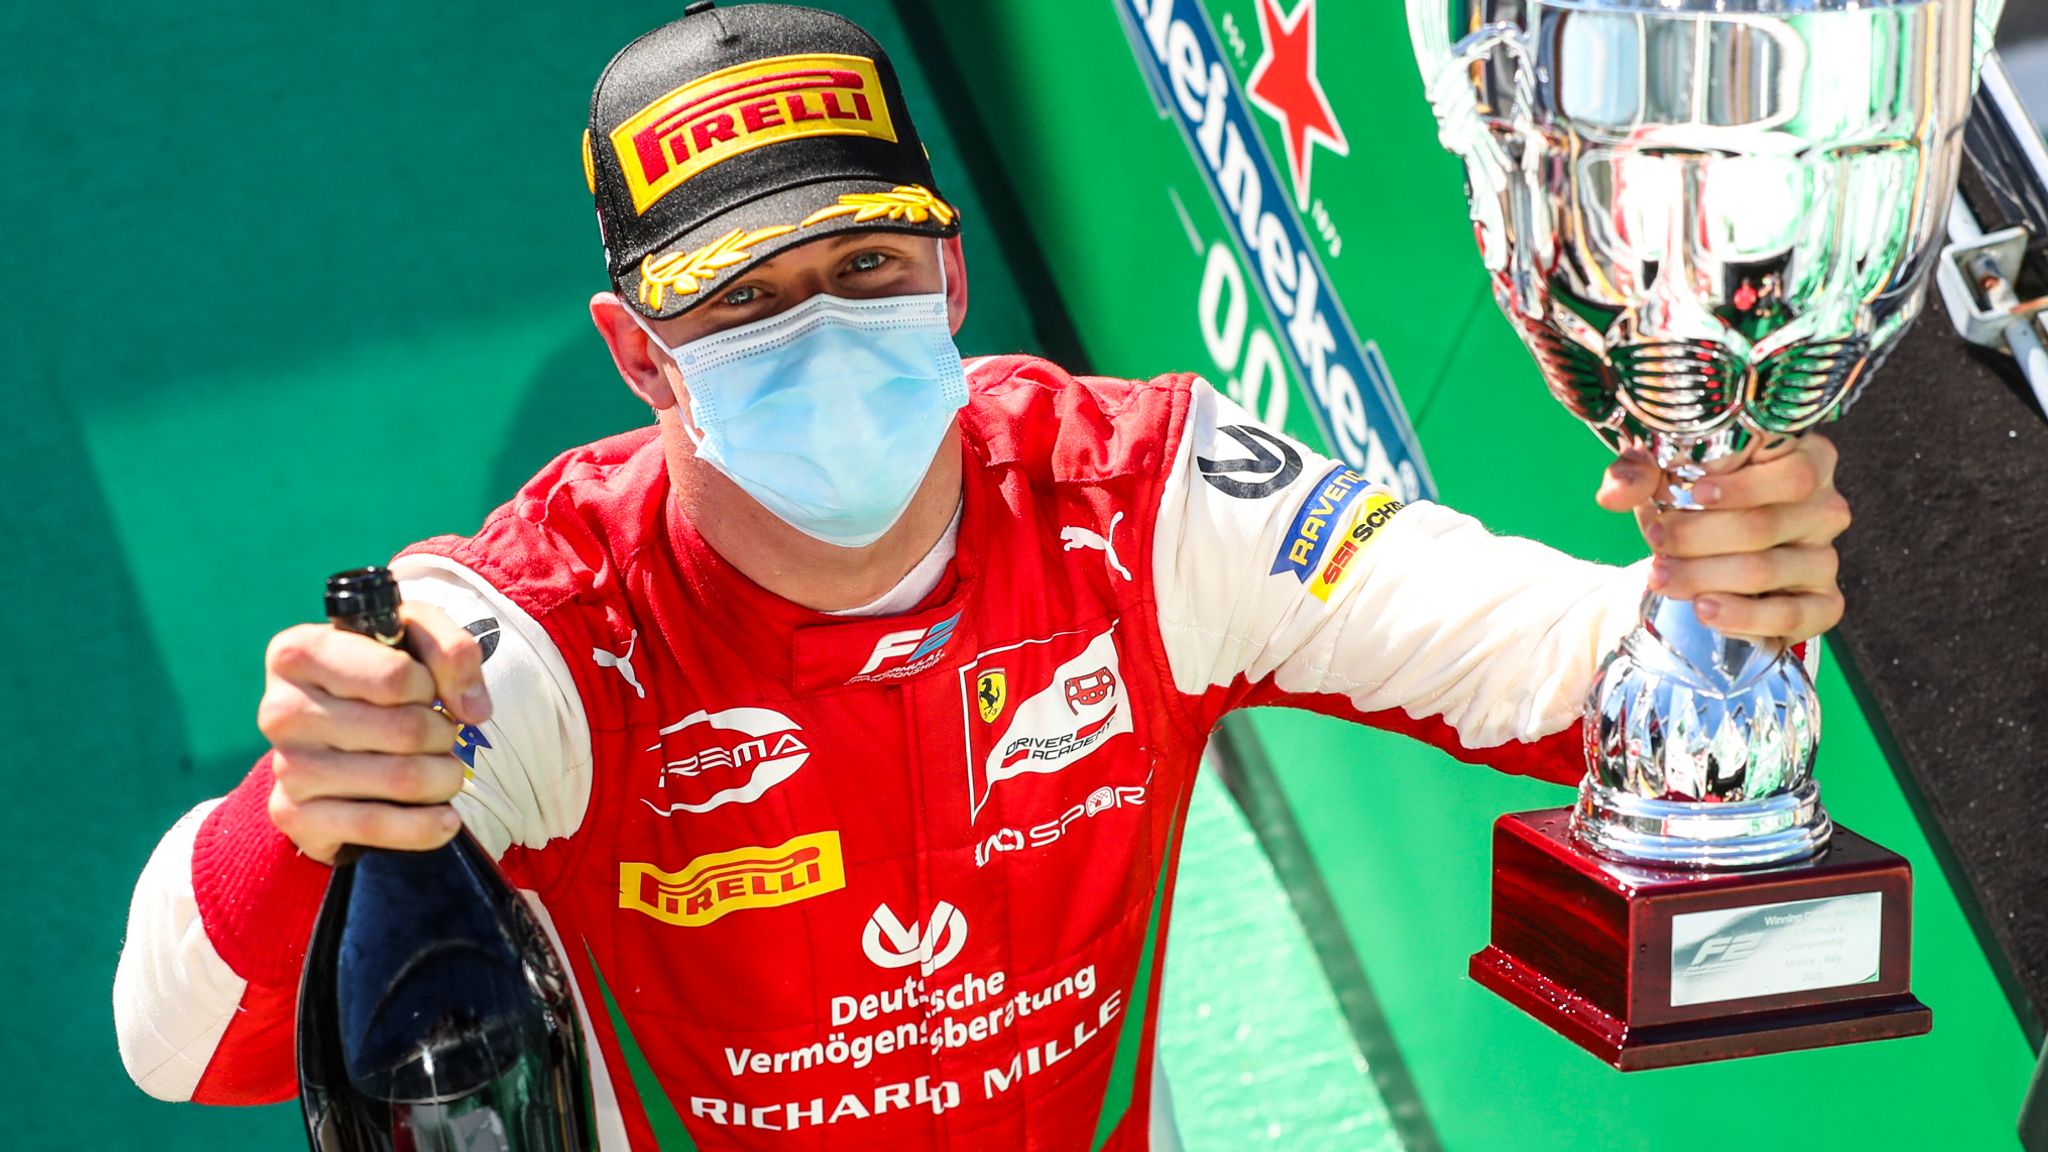 Mick Schumacher wins in F2 in 'ray of sunshine' for Ferrari at Monza